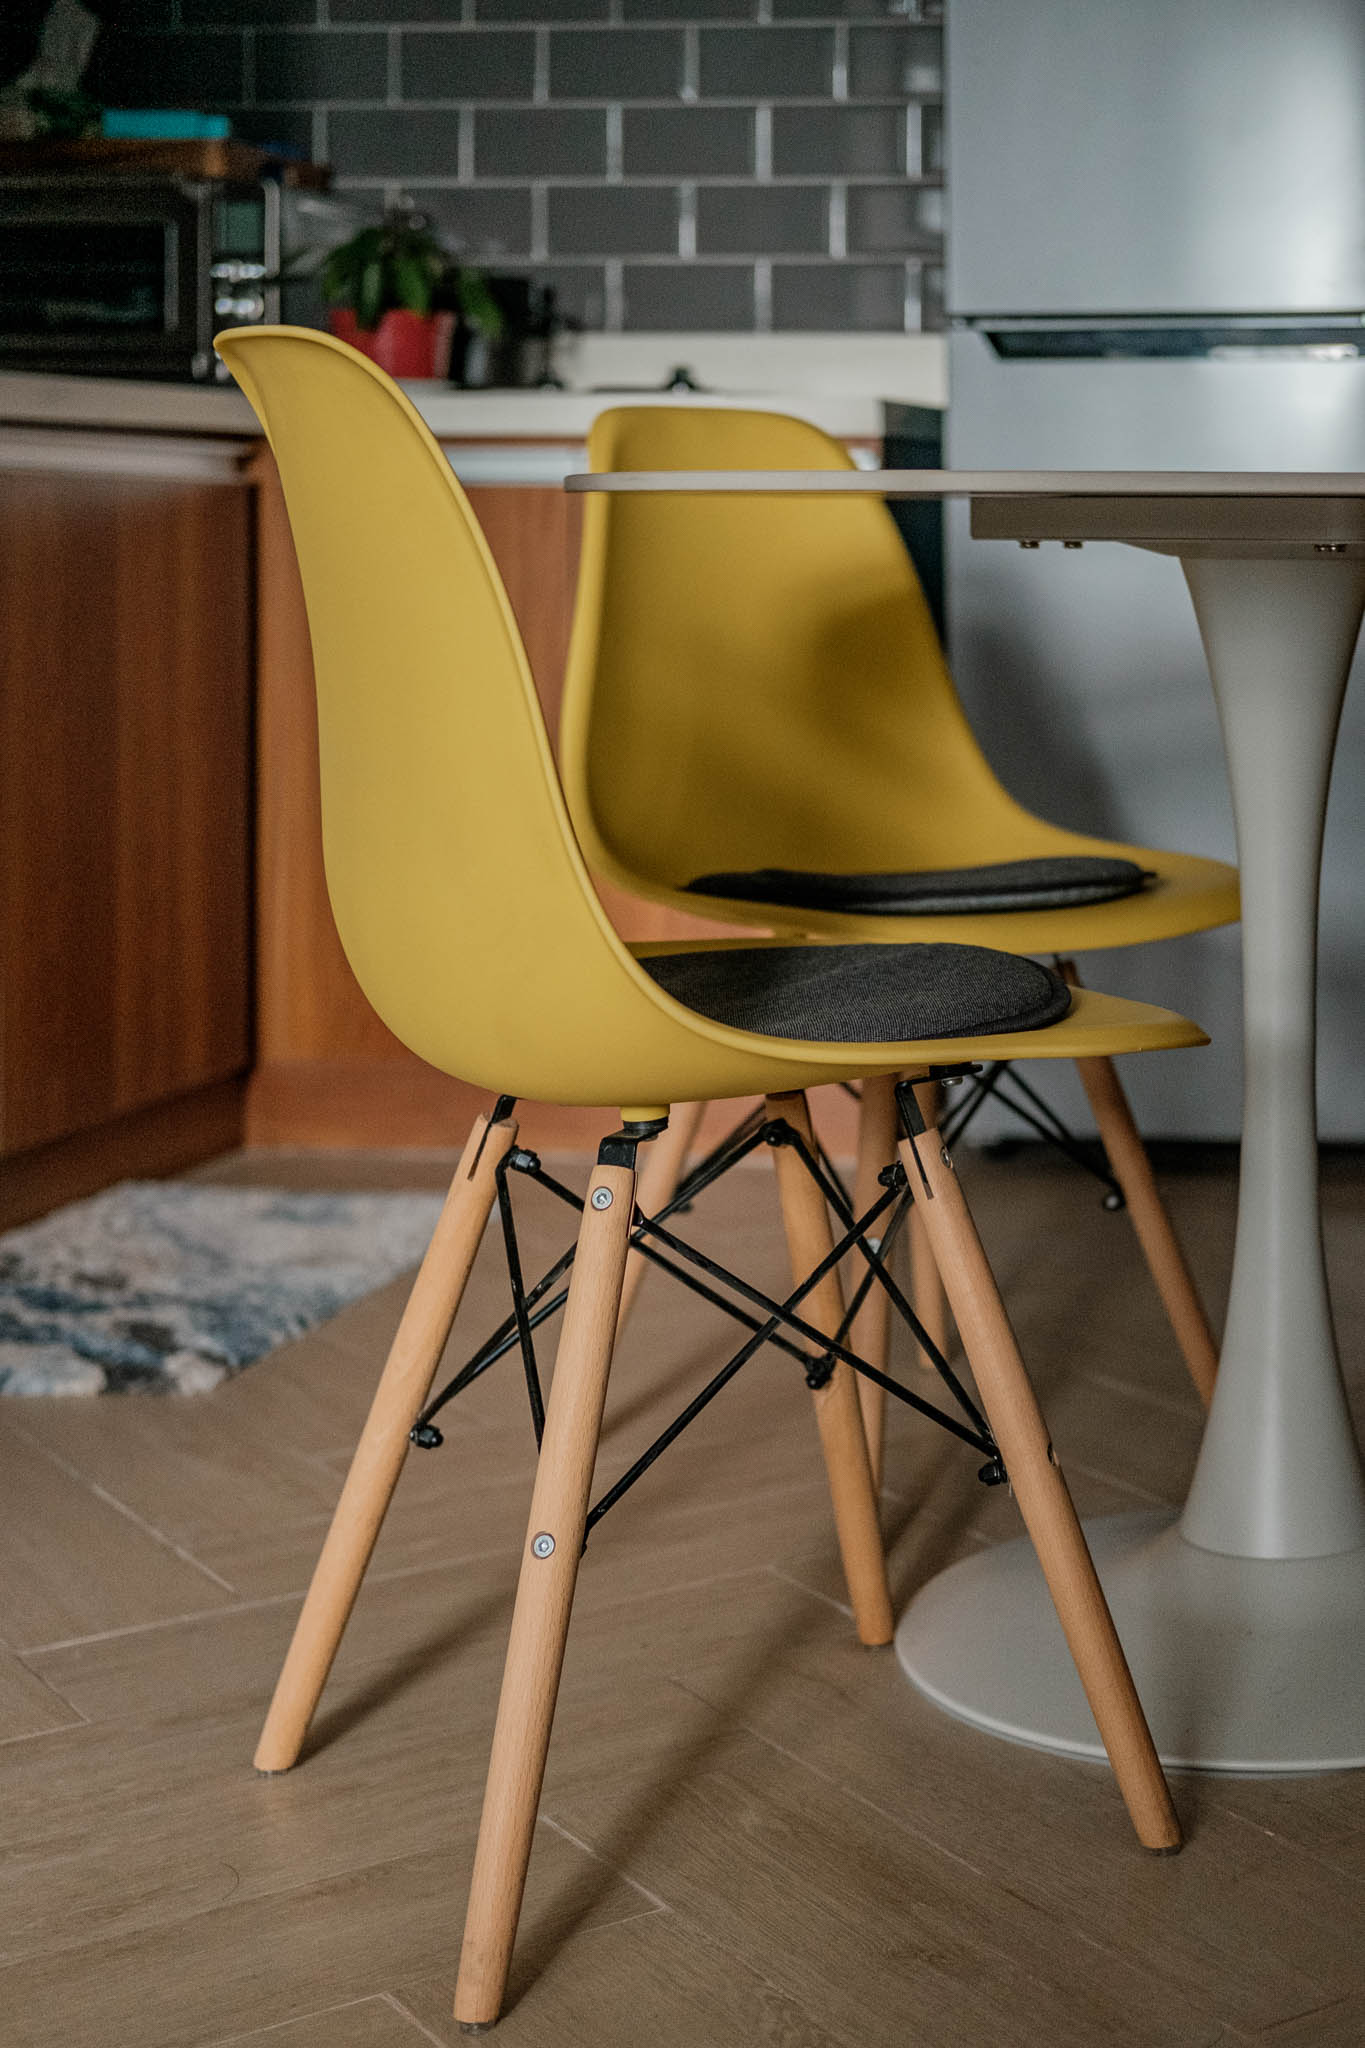 Eames-inspired yellow eggshell chair